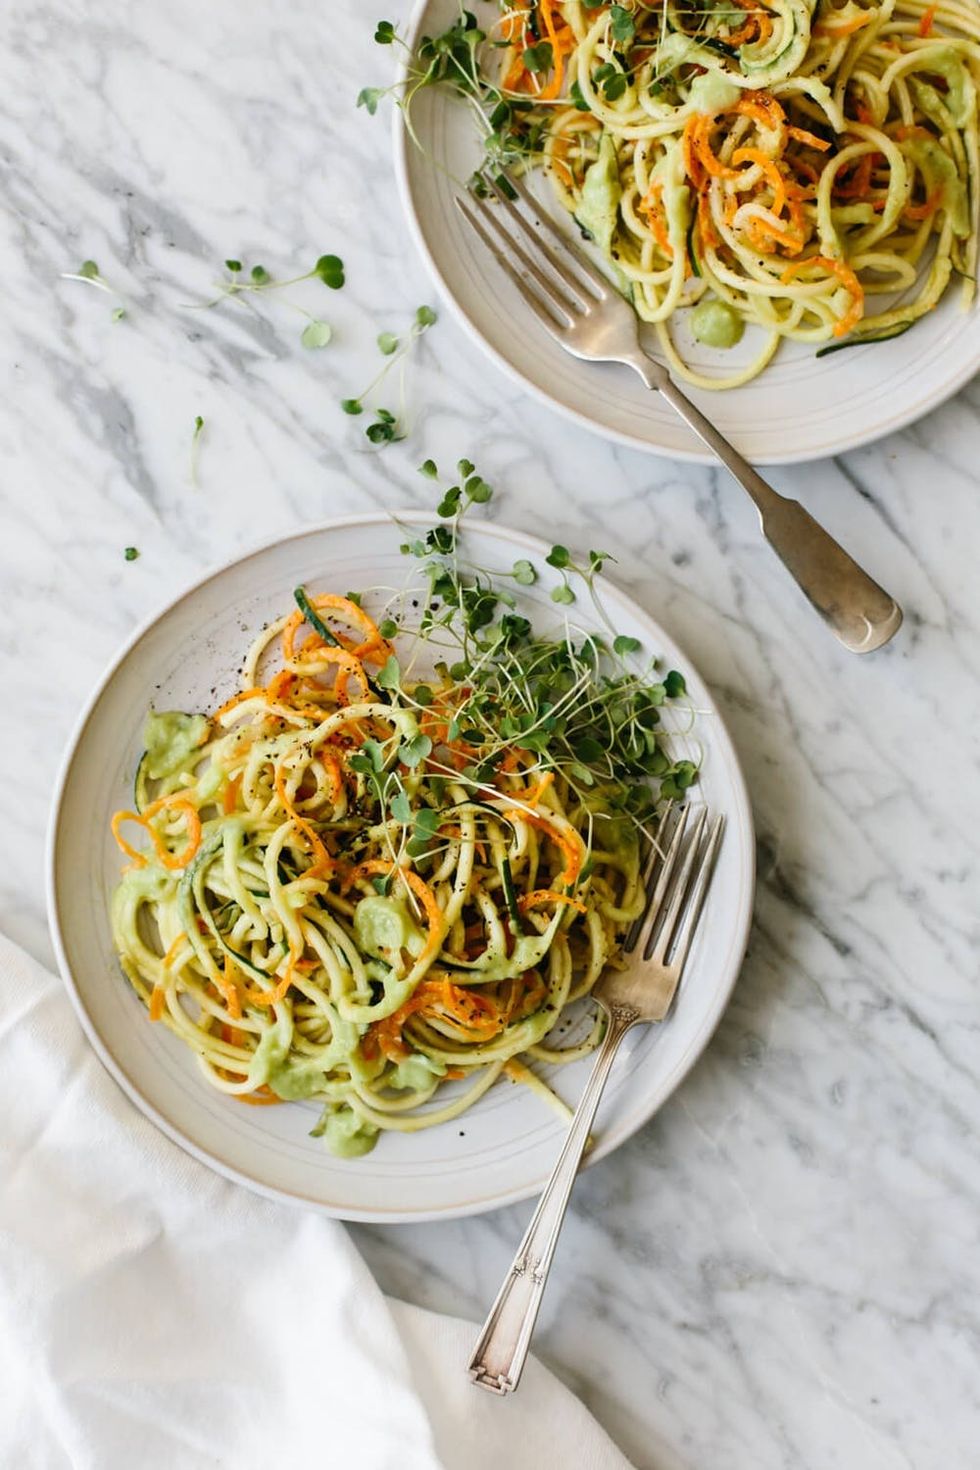 Carrot and Zucchini Pasta With Avocado-Cucumber Sauce